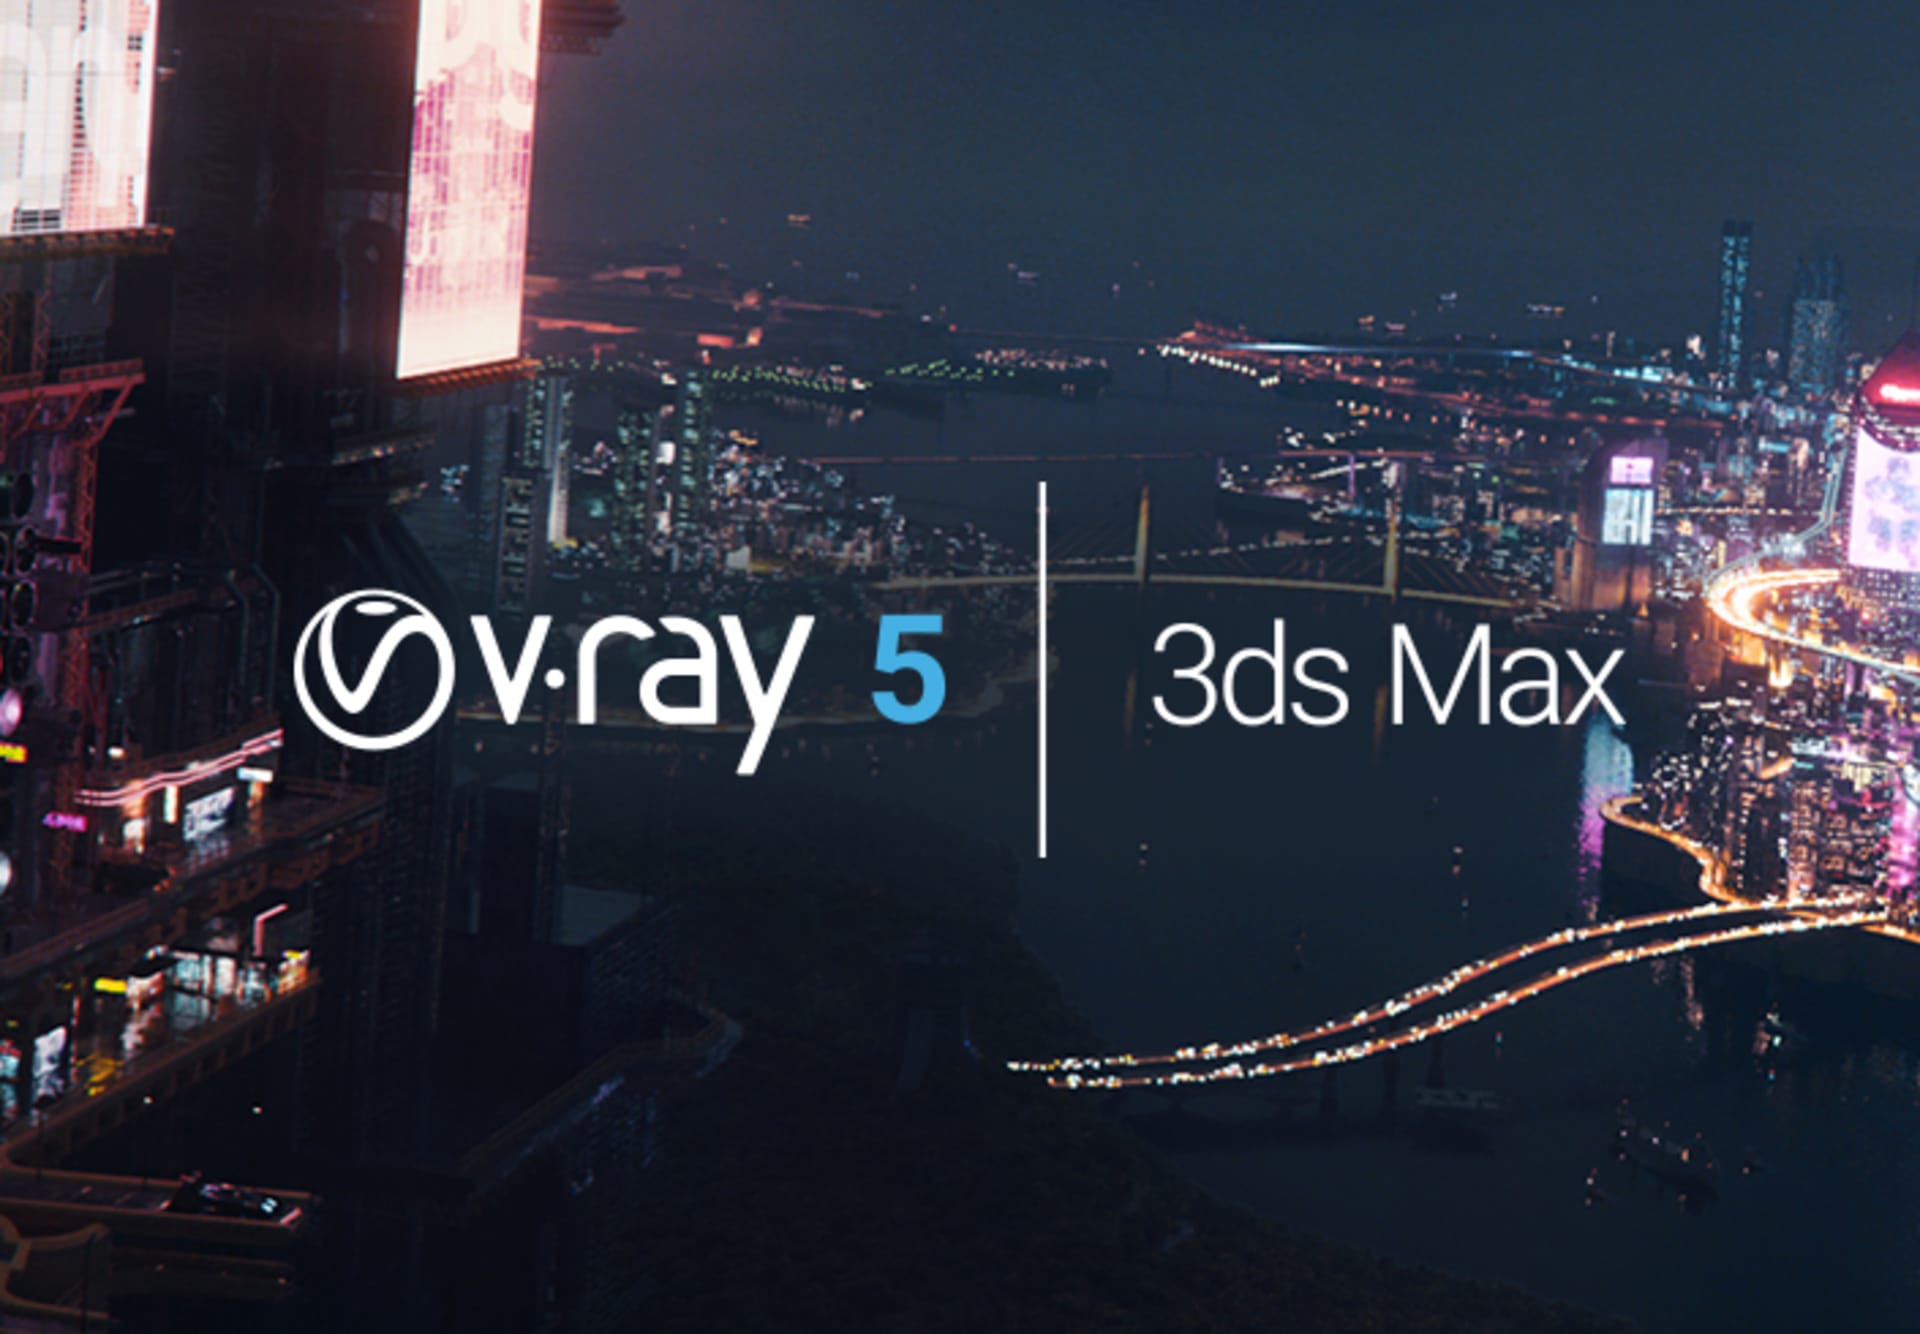 1592806027 vray 5 for 3ds max News thumb 705x490 1